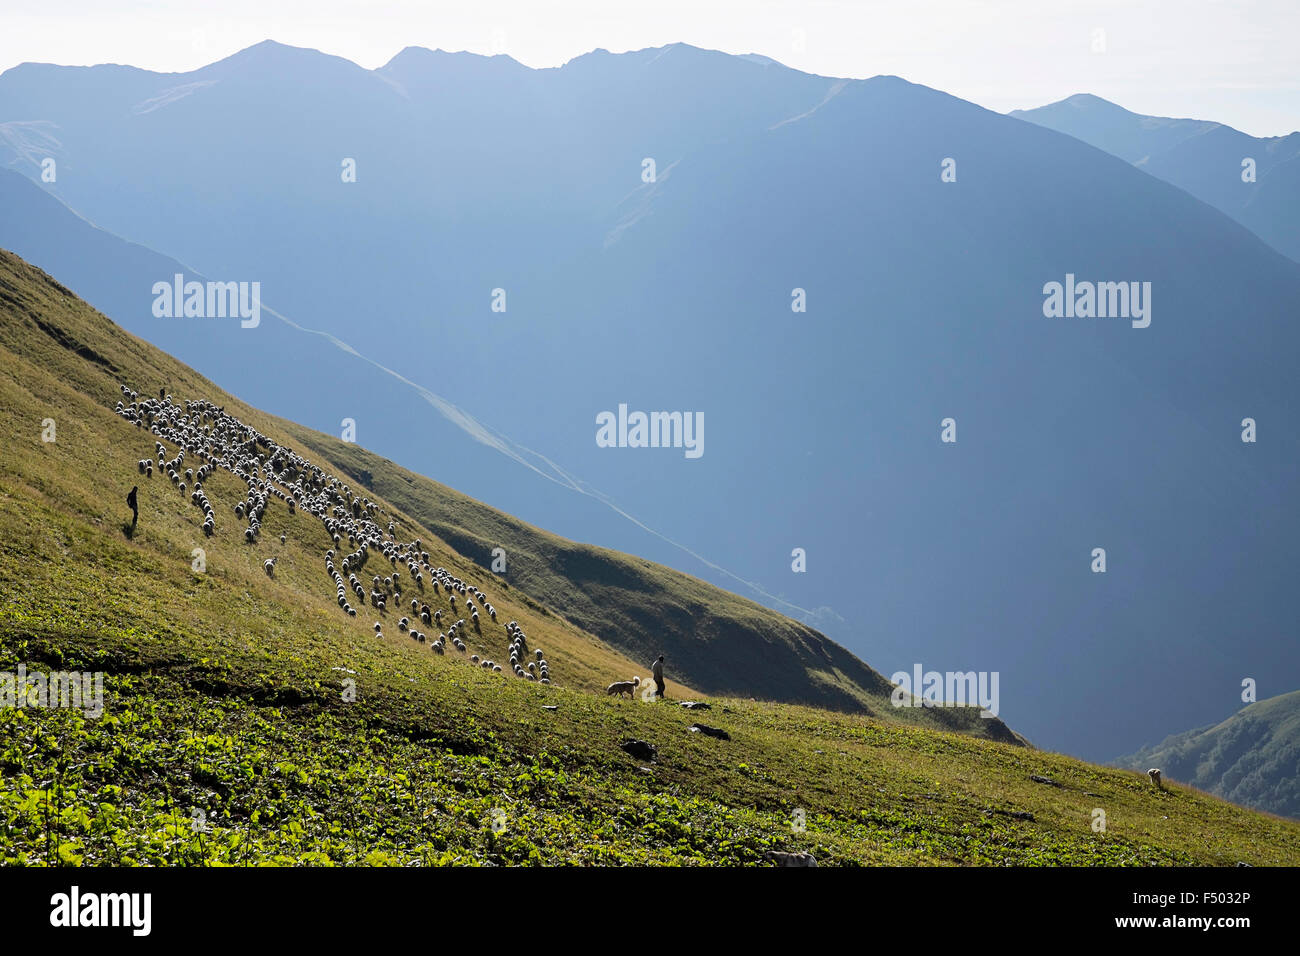 General view of the Caucasus Mountains in Georgia, Asia. These images feature Georgian men looking after their flock Stock Photo